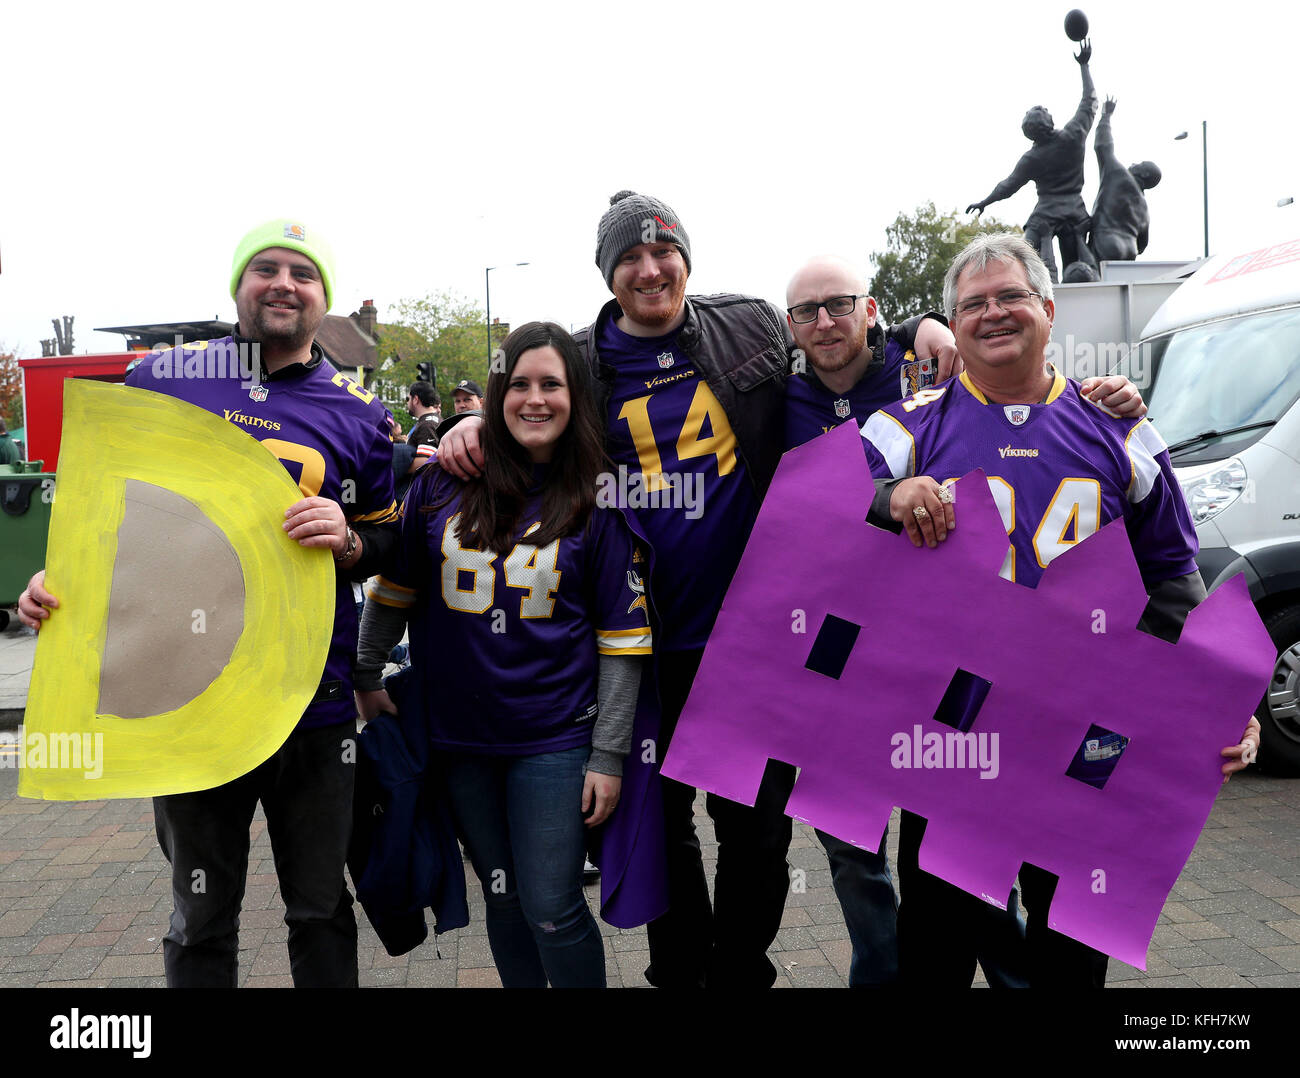 Minnesota Vikings fans hold up 'Defence' signs in support of their team before the International Series NFL match at Twickenham, London. Stock Photo